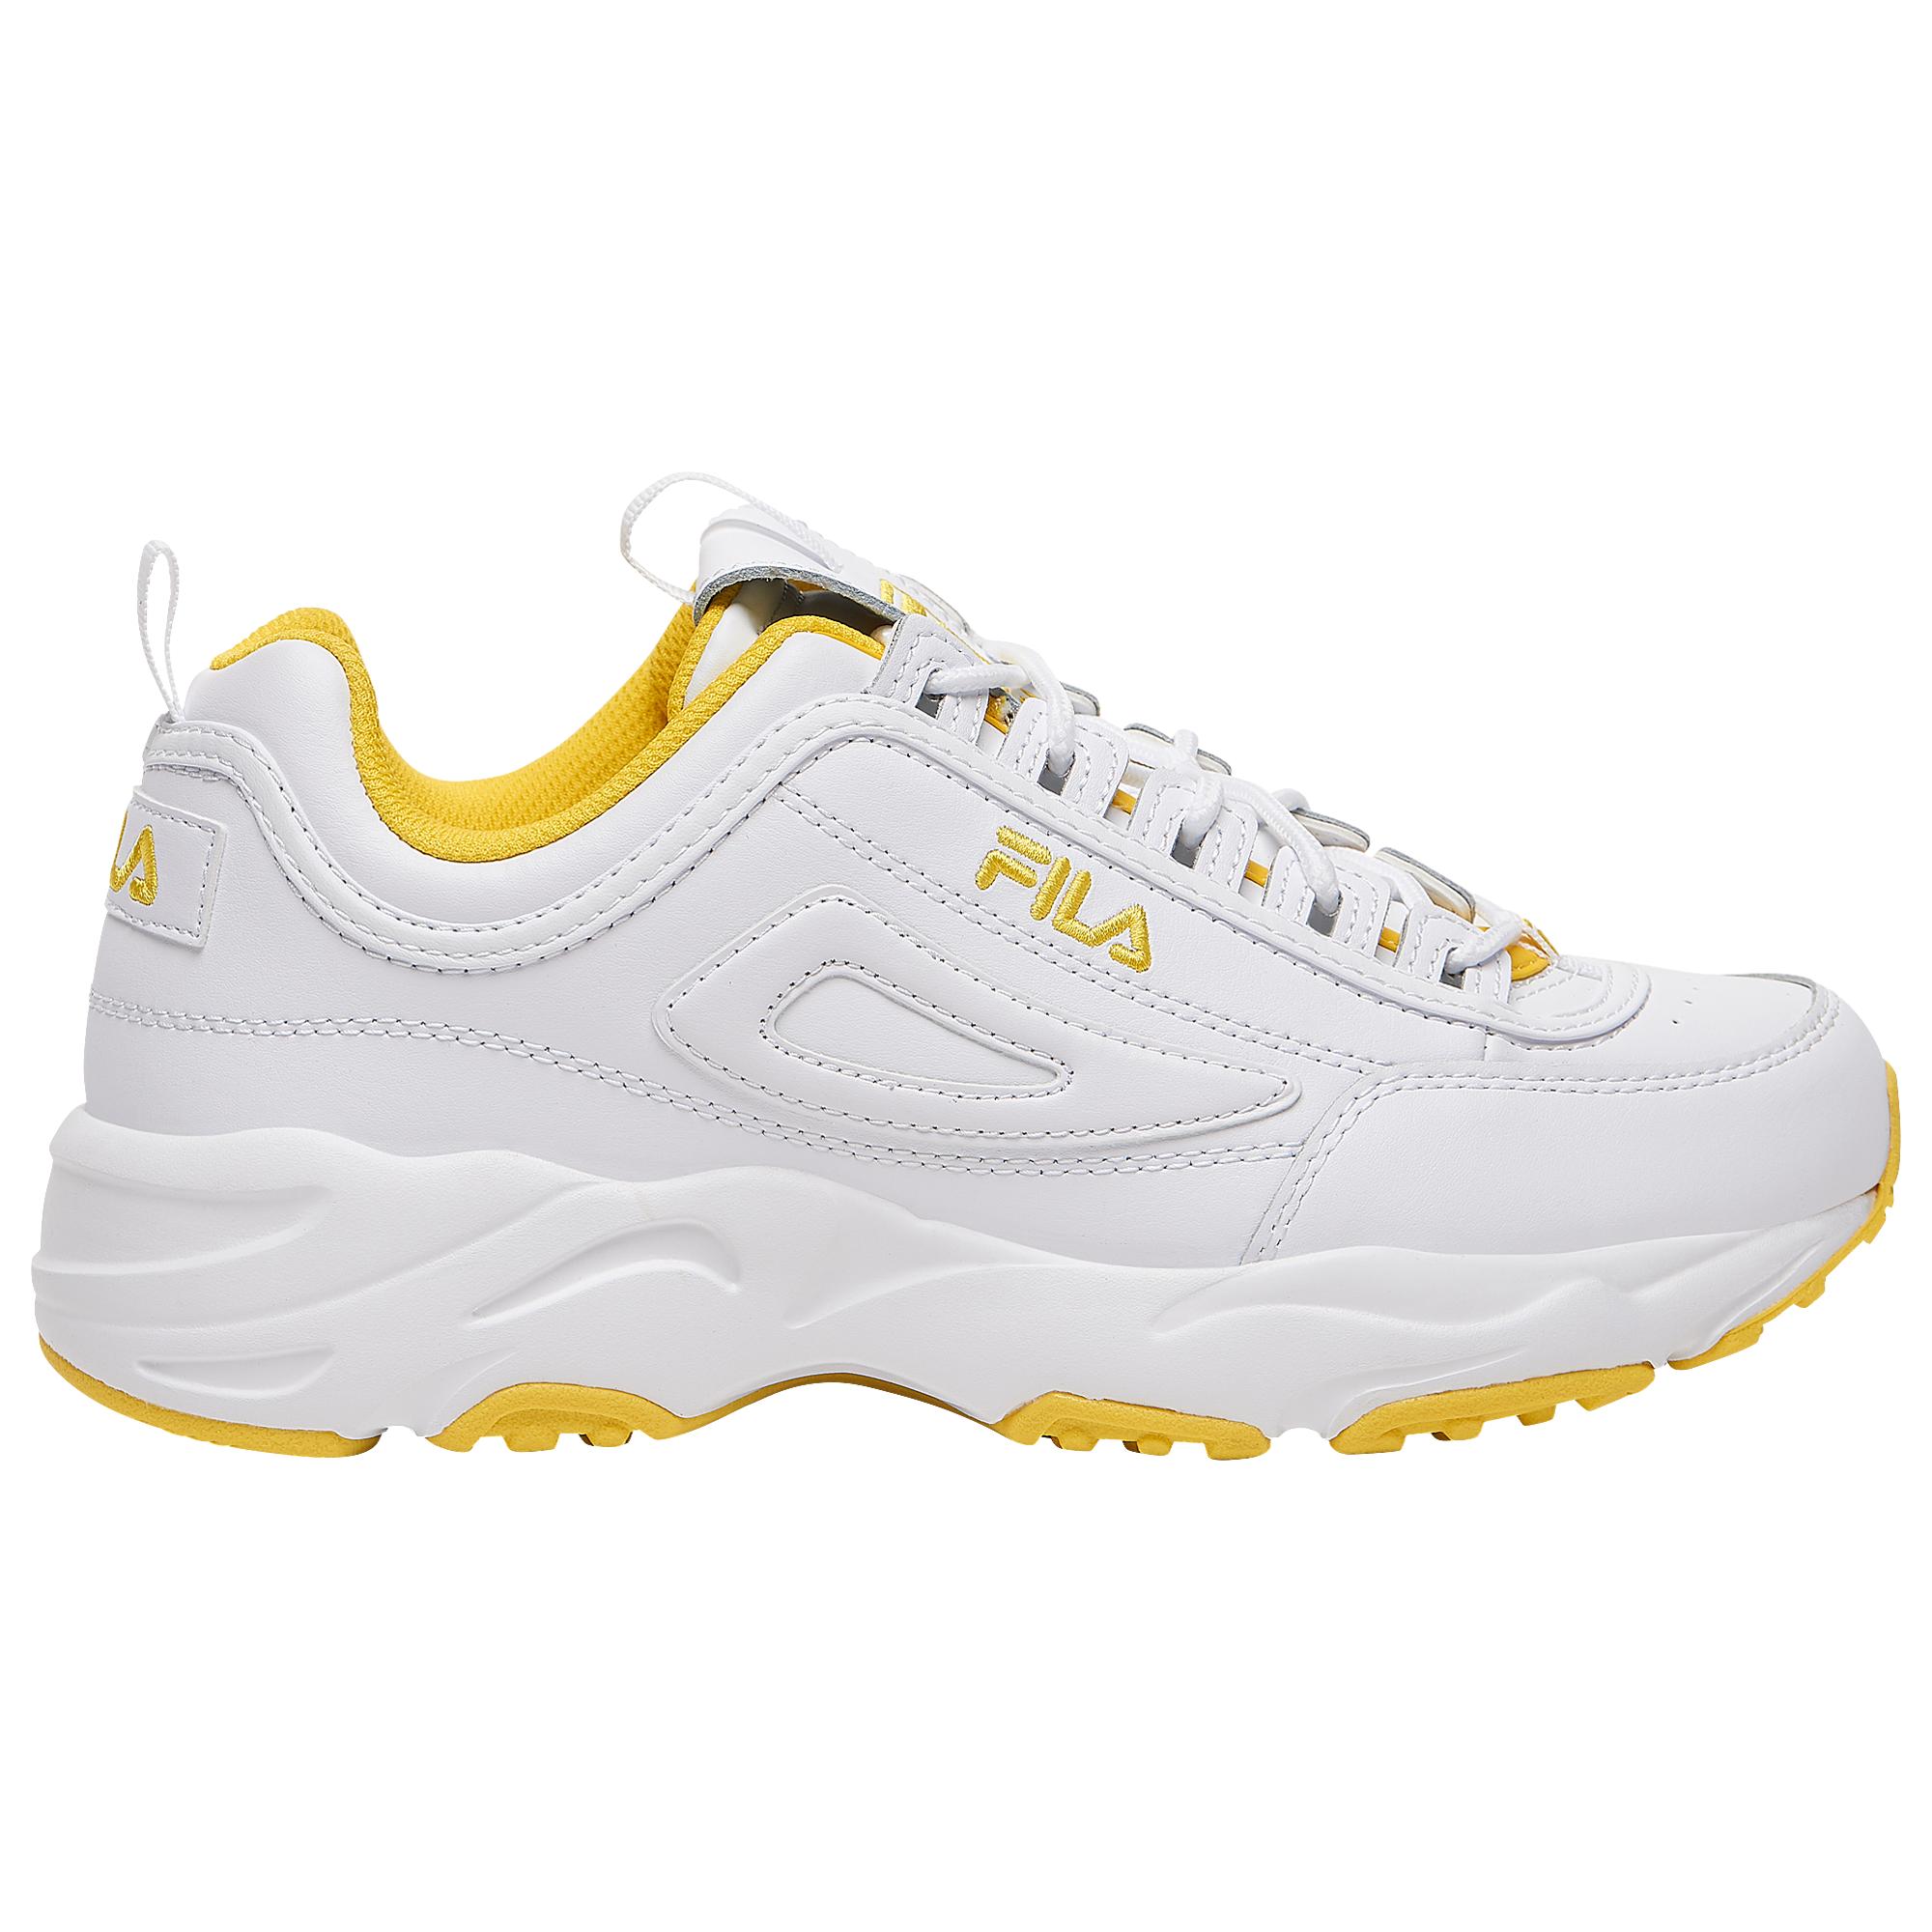 Fila Suede Disruptor Ii X Ray Tracer in 